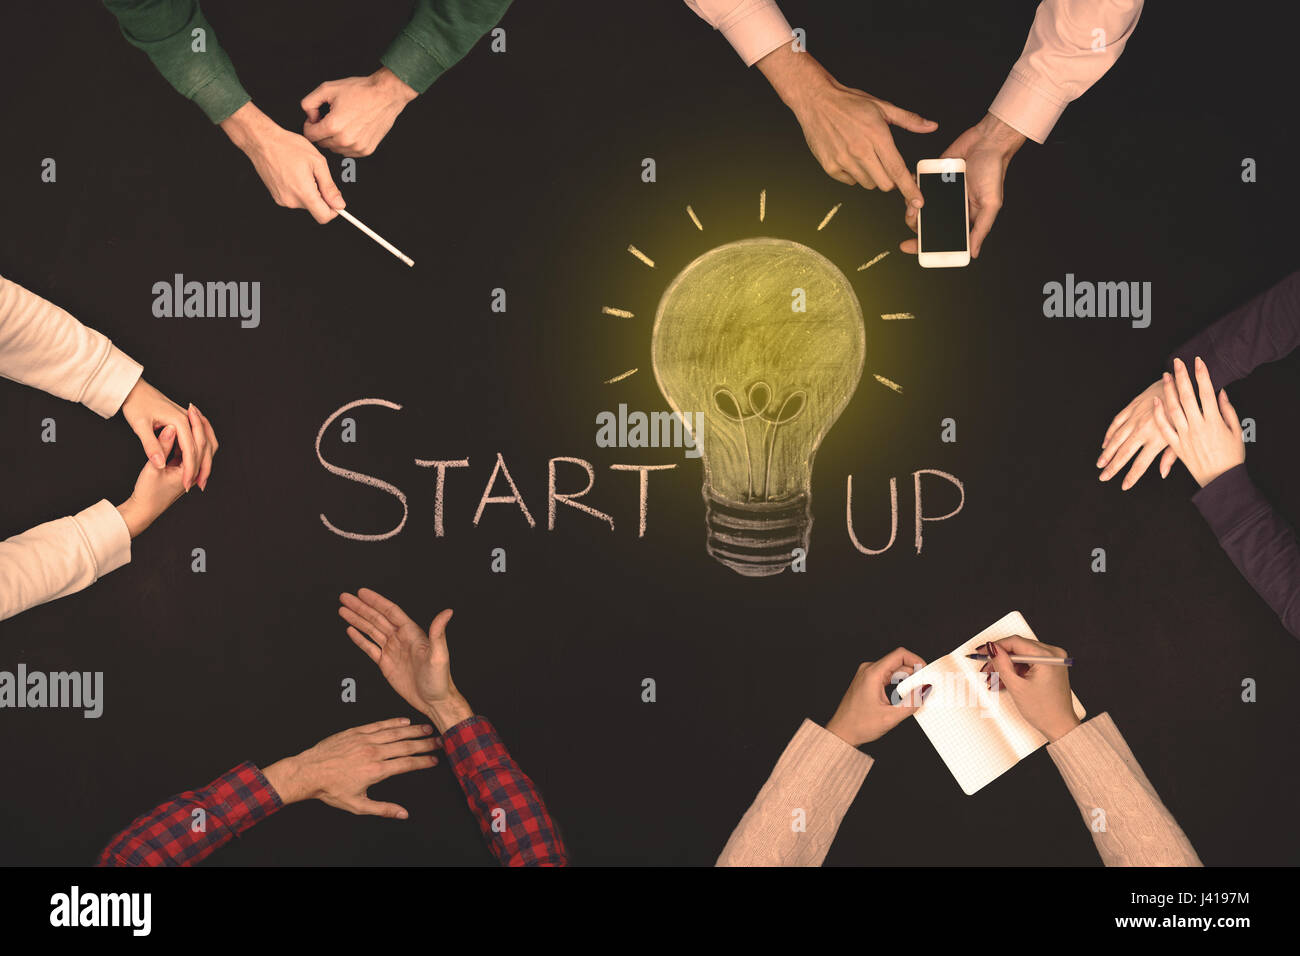 Teamwork startup concept - top view of six people. Stock Photo